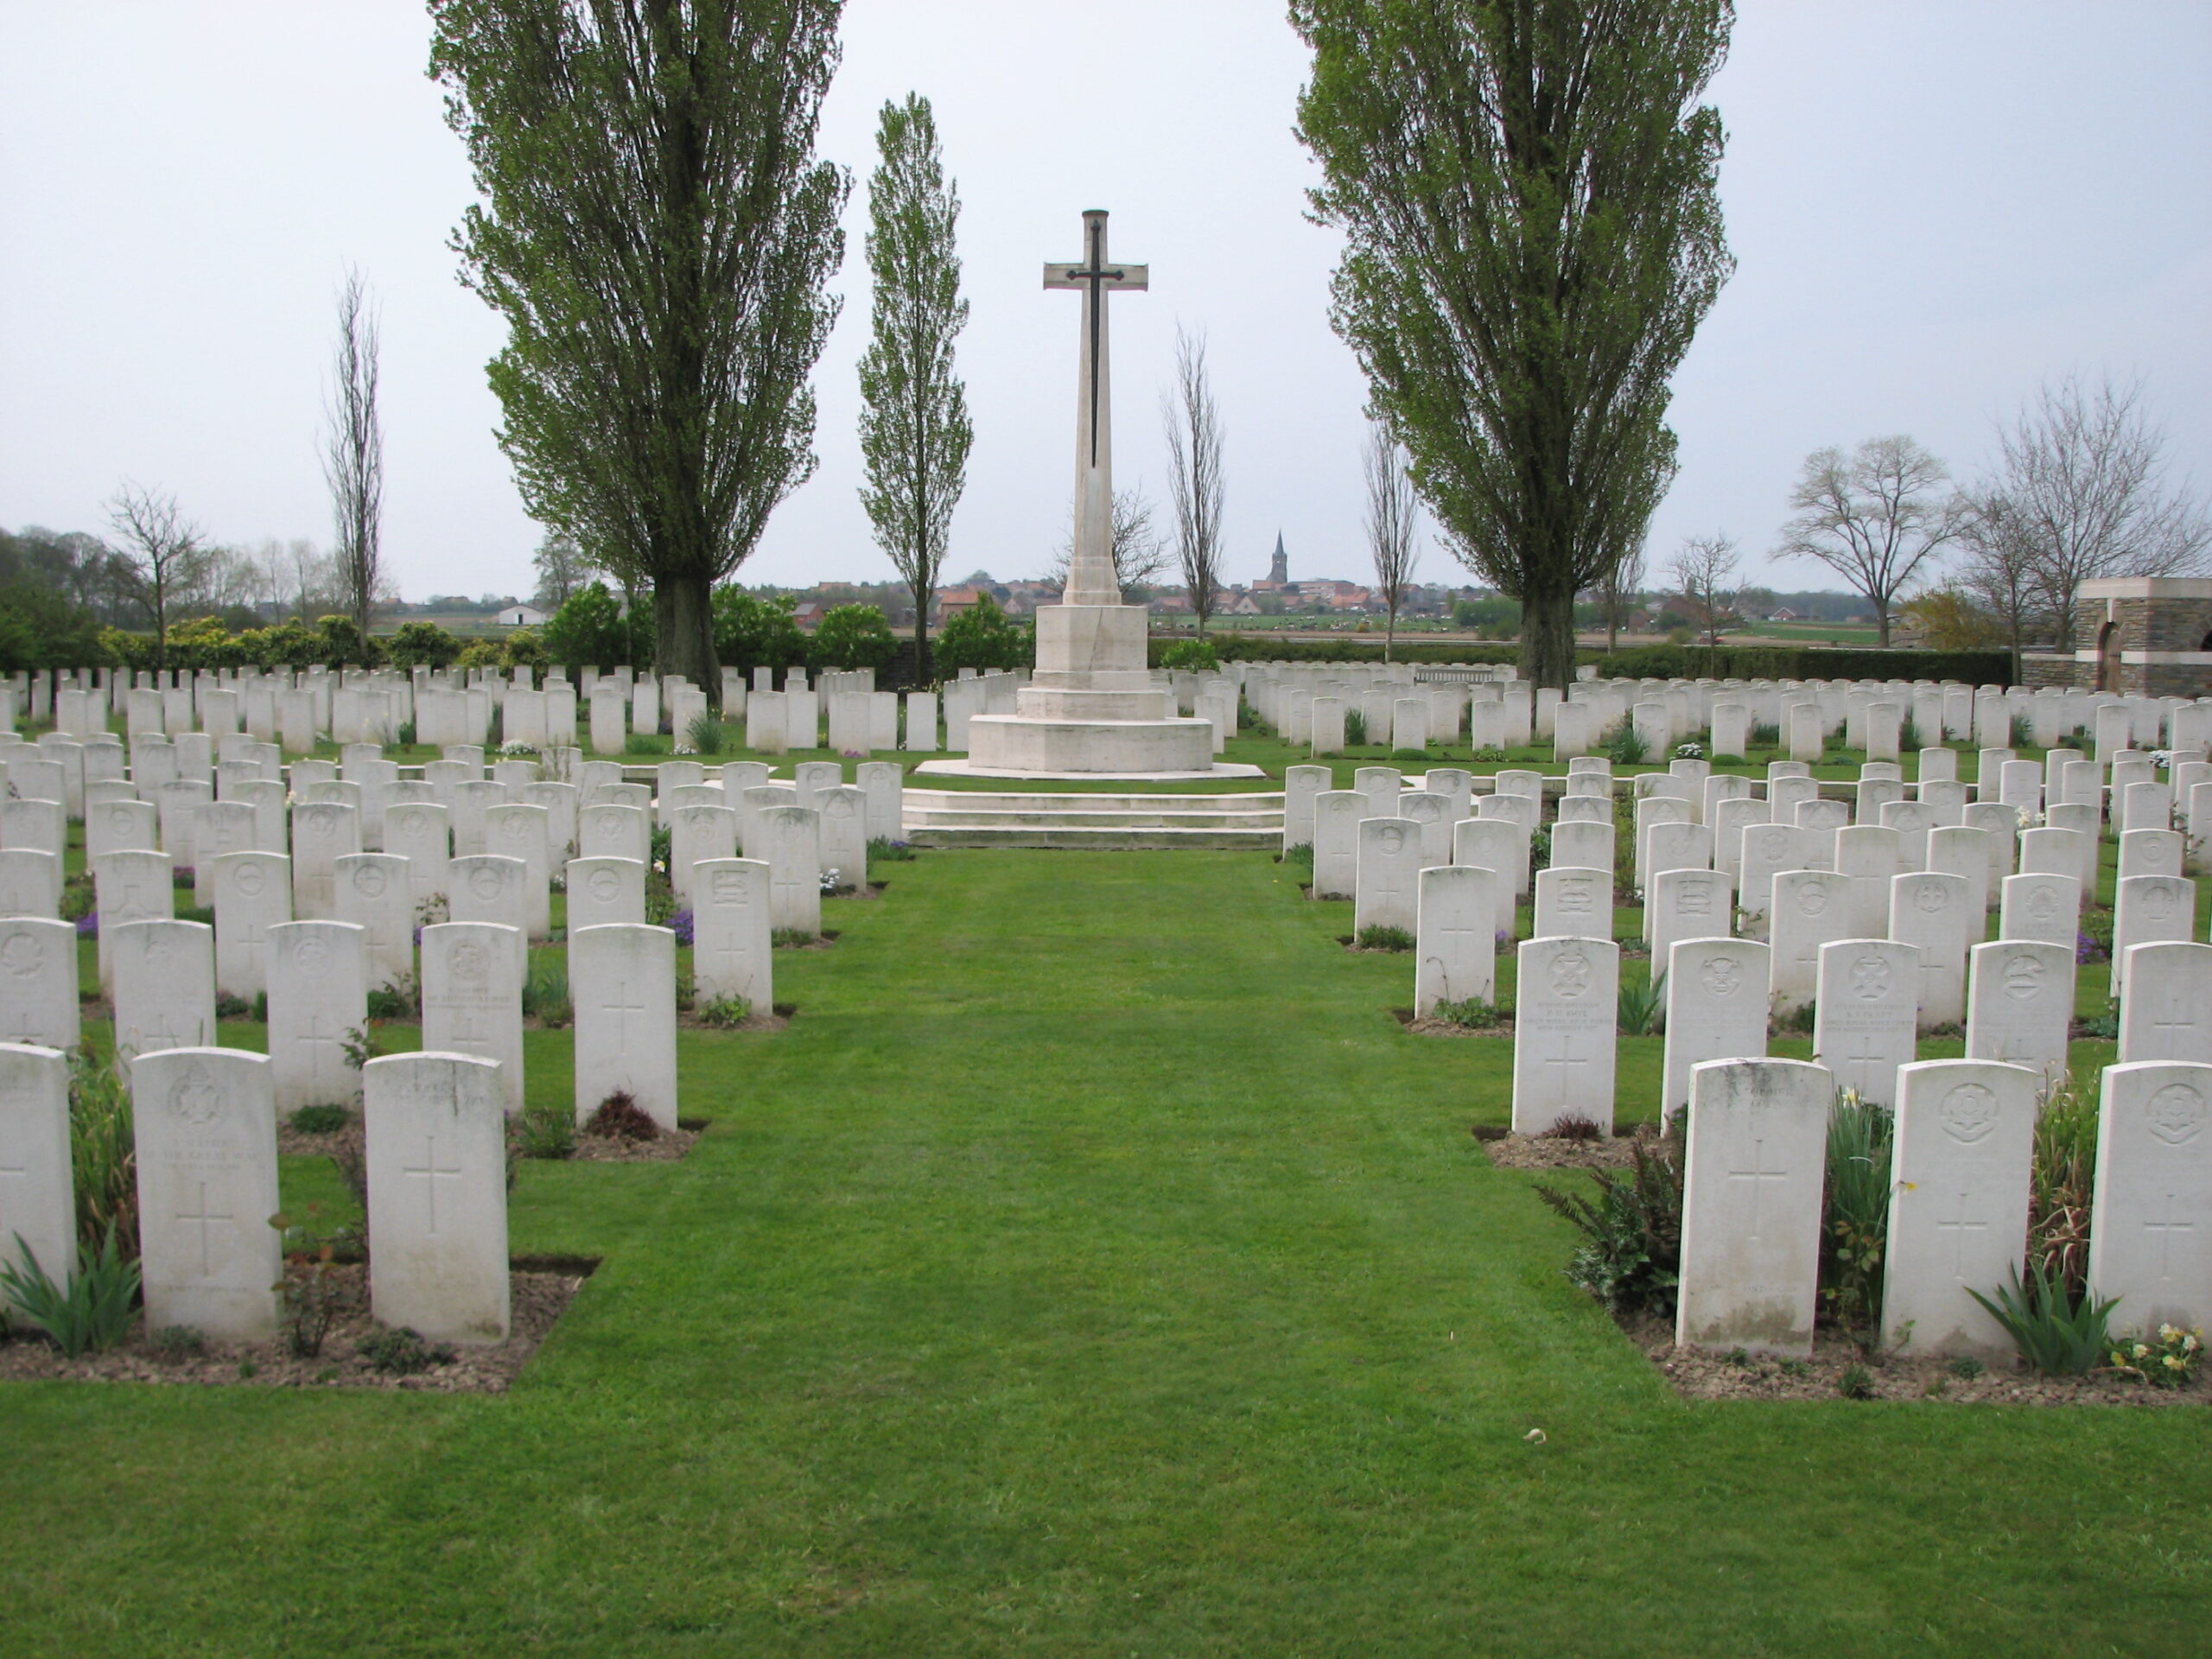 Oosttaverne Wood Cemetery, near Ieper, Belgium<br>The village of Wijtschate (Wytschaete) can be seen in the background<br />MA